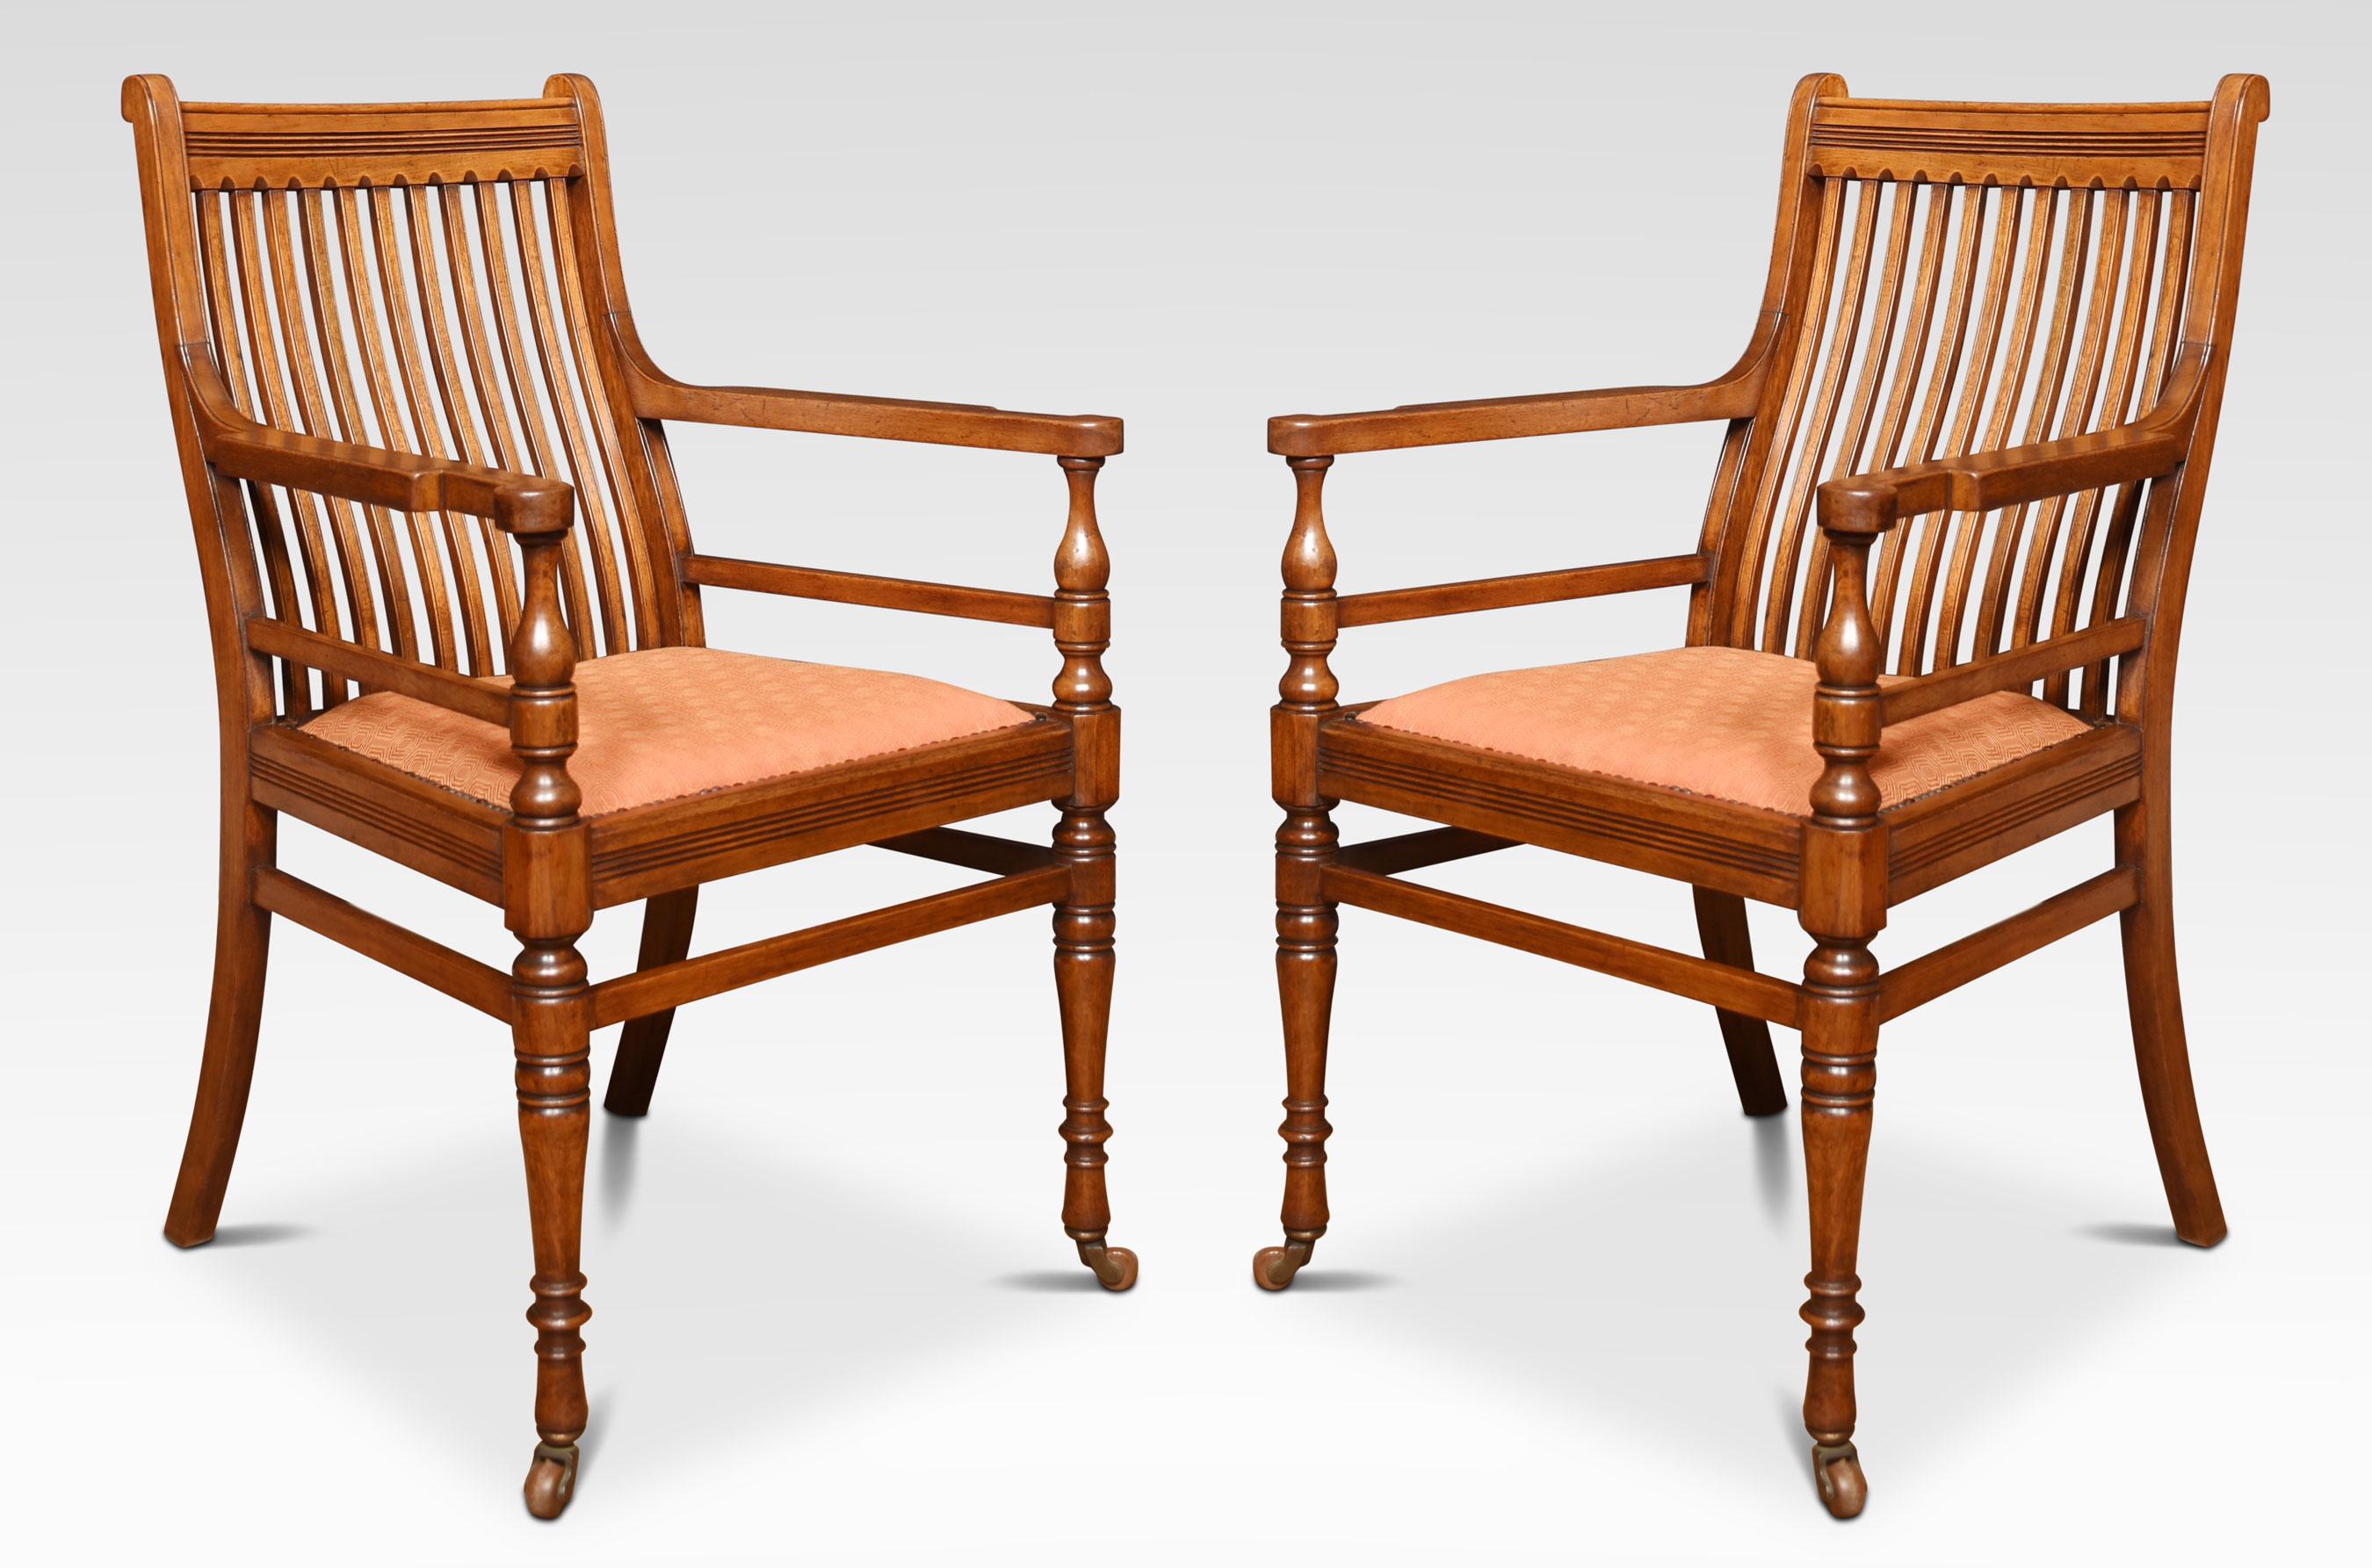 Set of Six James Shoolbread dining chairs, comprising of two armchairs and four chairs, the shed comb backs above upholstered seat. All raised up on ring turned legs united by stretchers.
Dimensions
Armchairs
Height 36.5 inches Height to seat 18